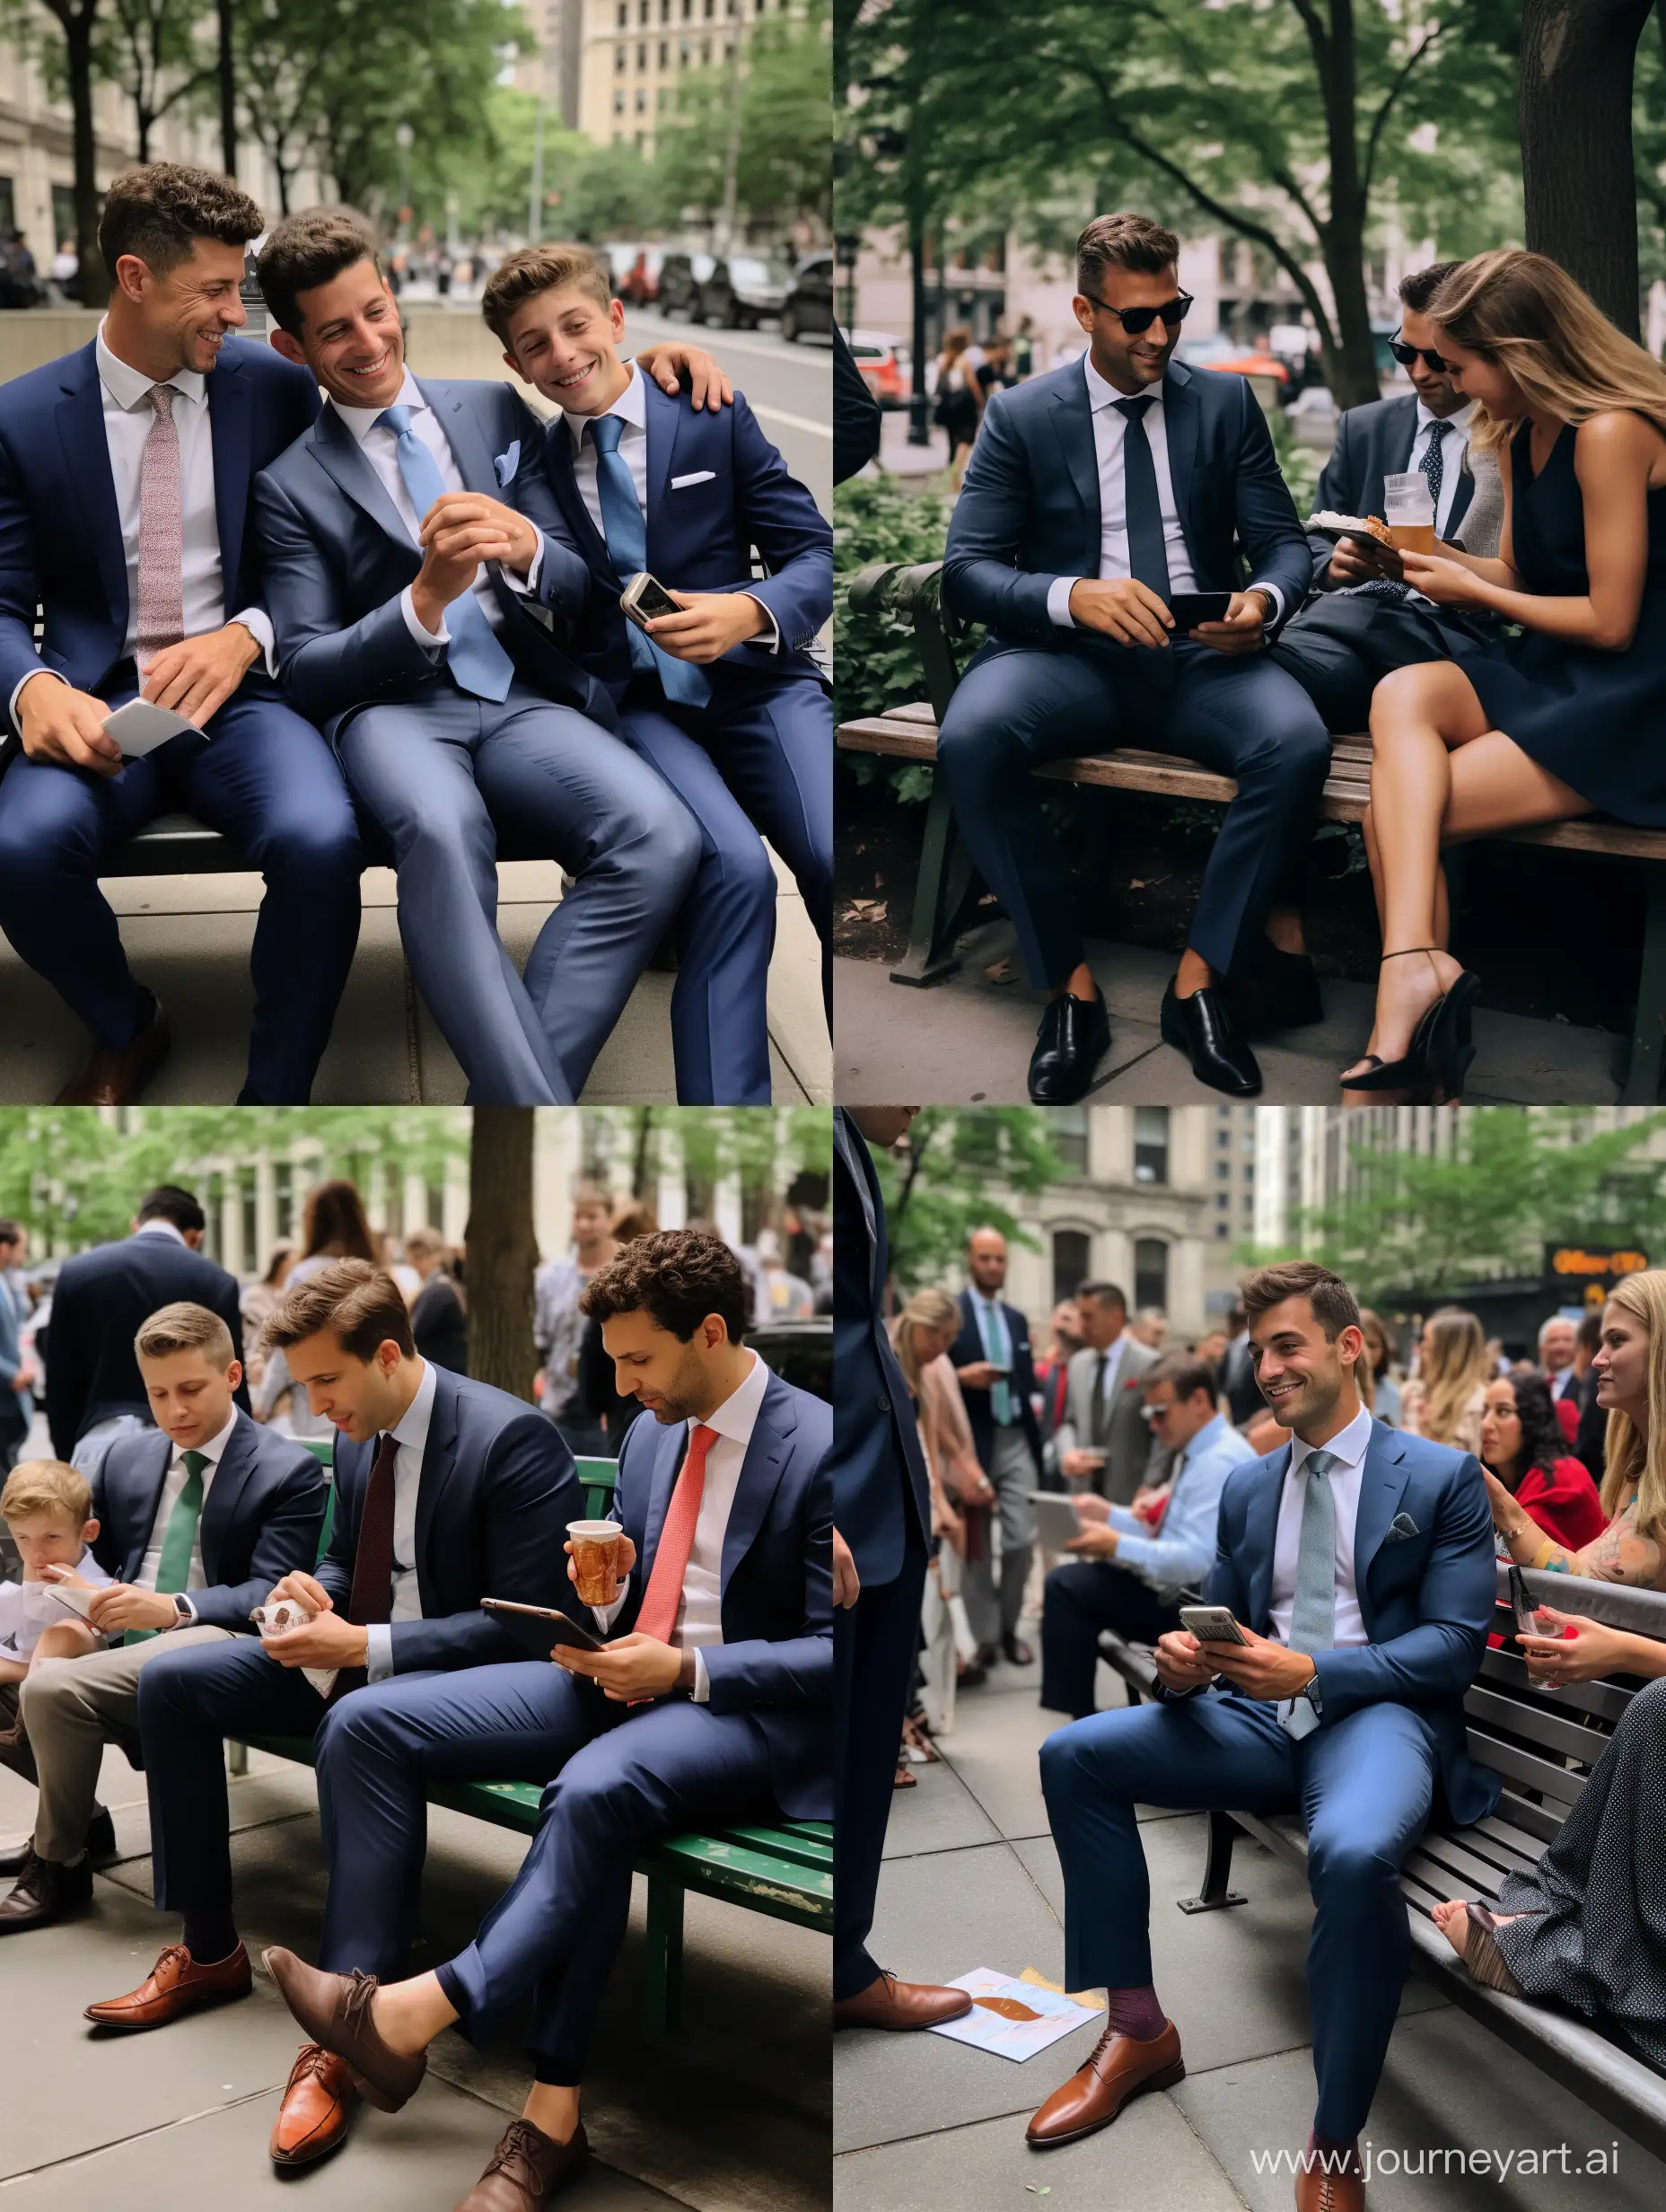 New-York-Wedding-Family-Portrait-Candid-Moment-on-a-Bench